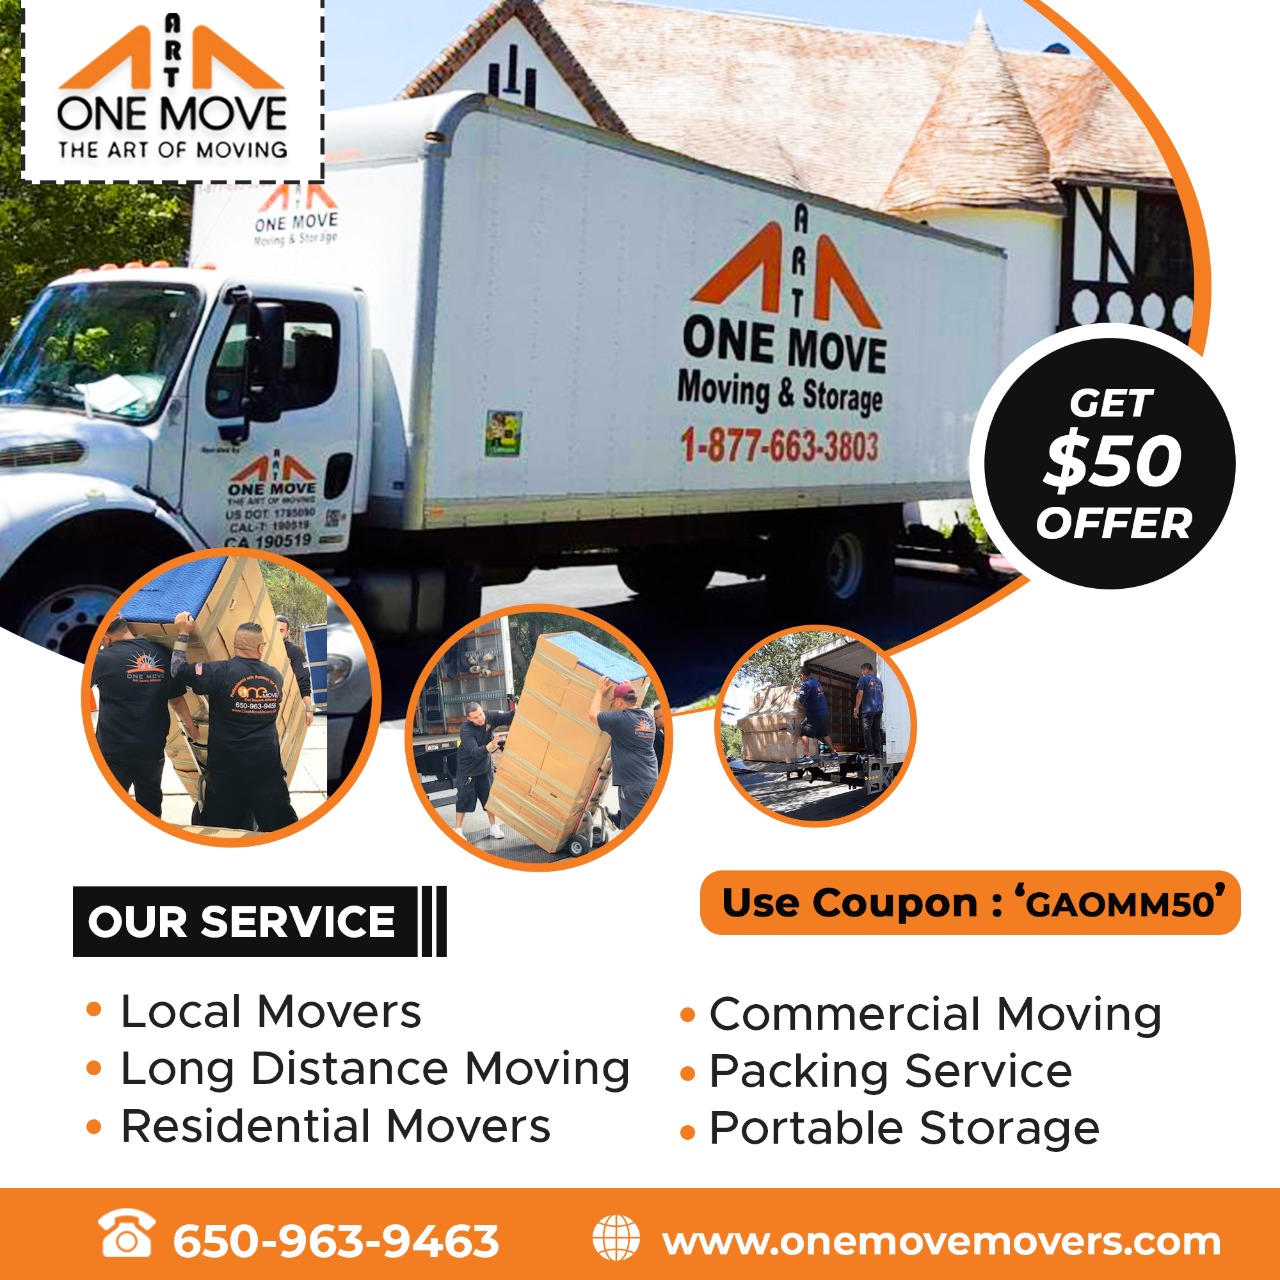 The One Move Moving Delivery & Storage